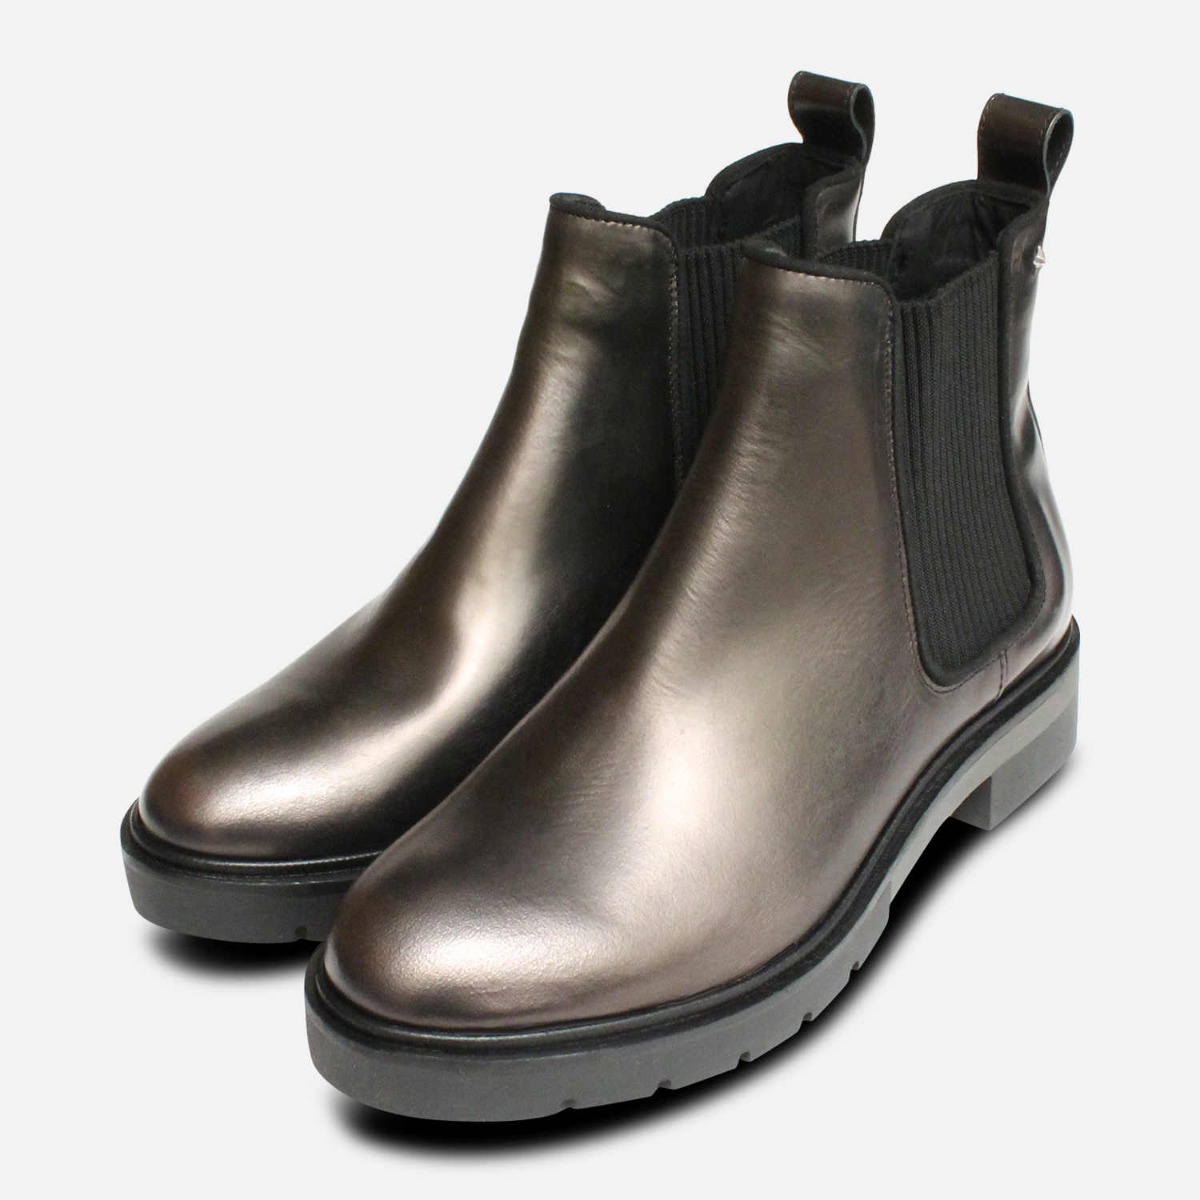 tommy chelsea boots